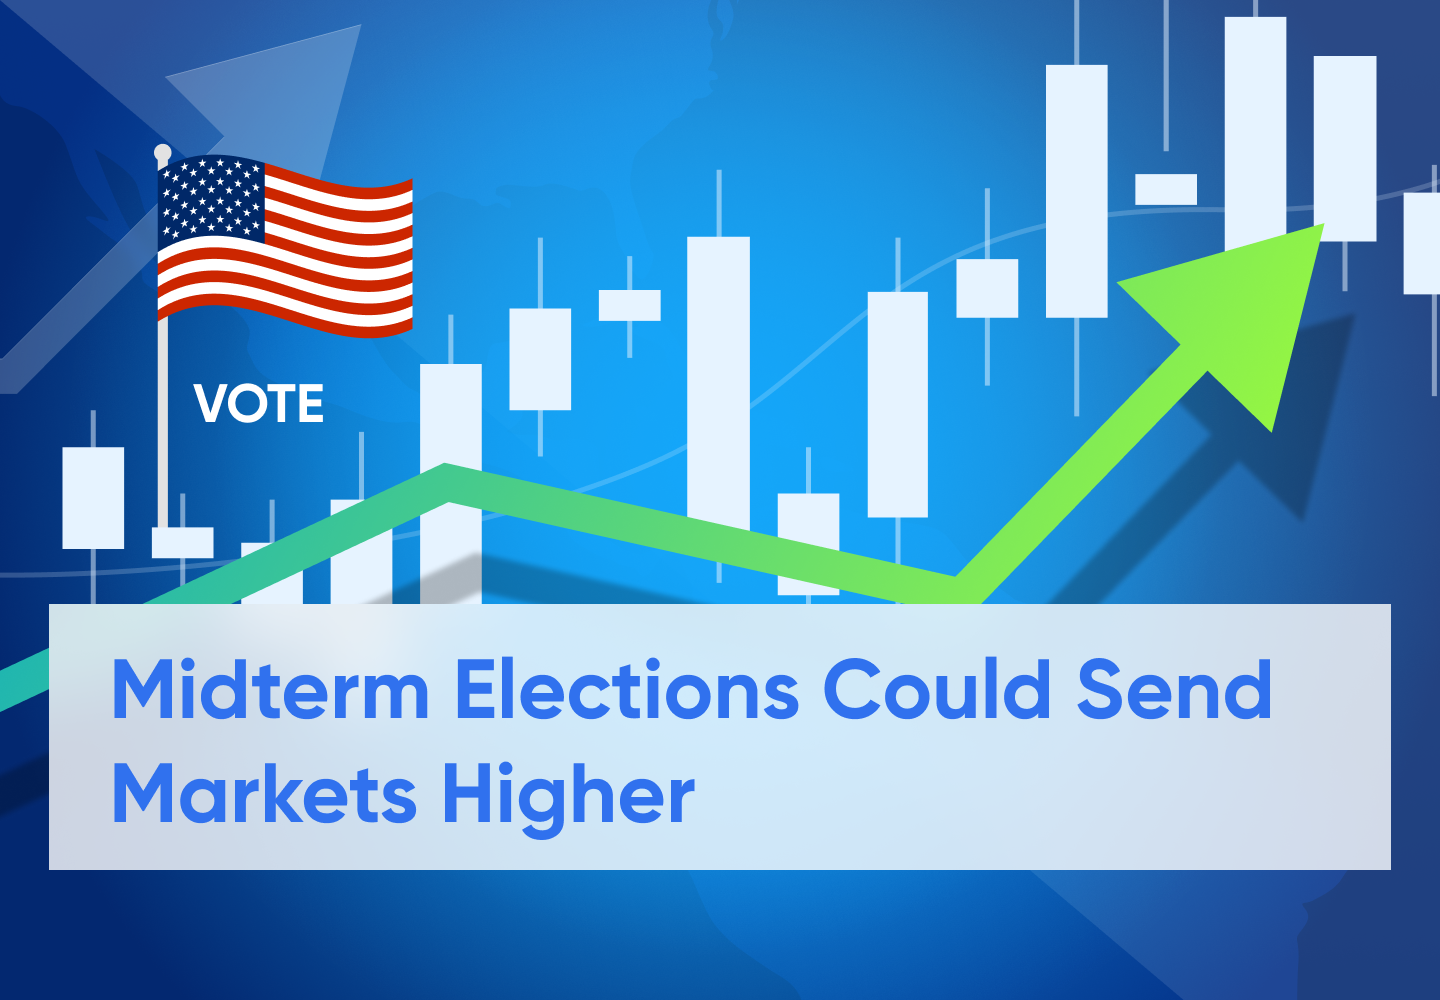 US Midterm Elections Could Be Favourable for Risky Assets